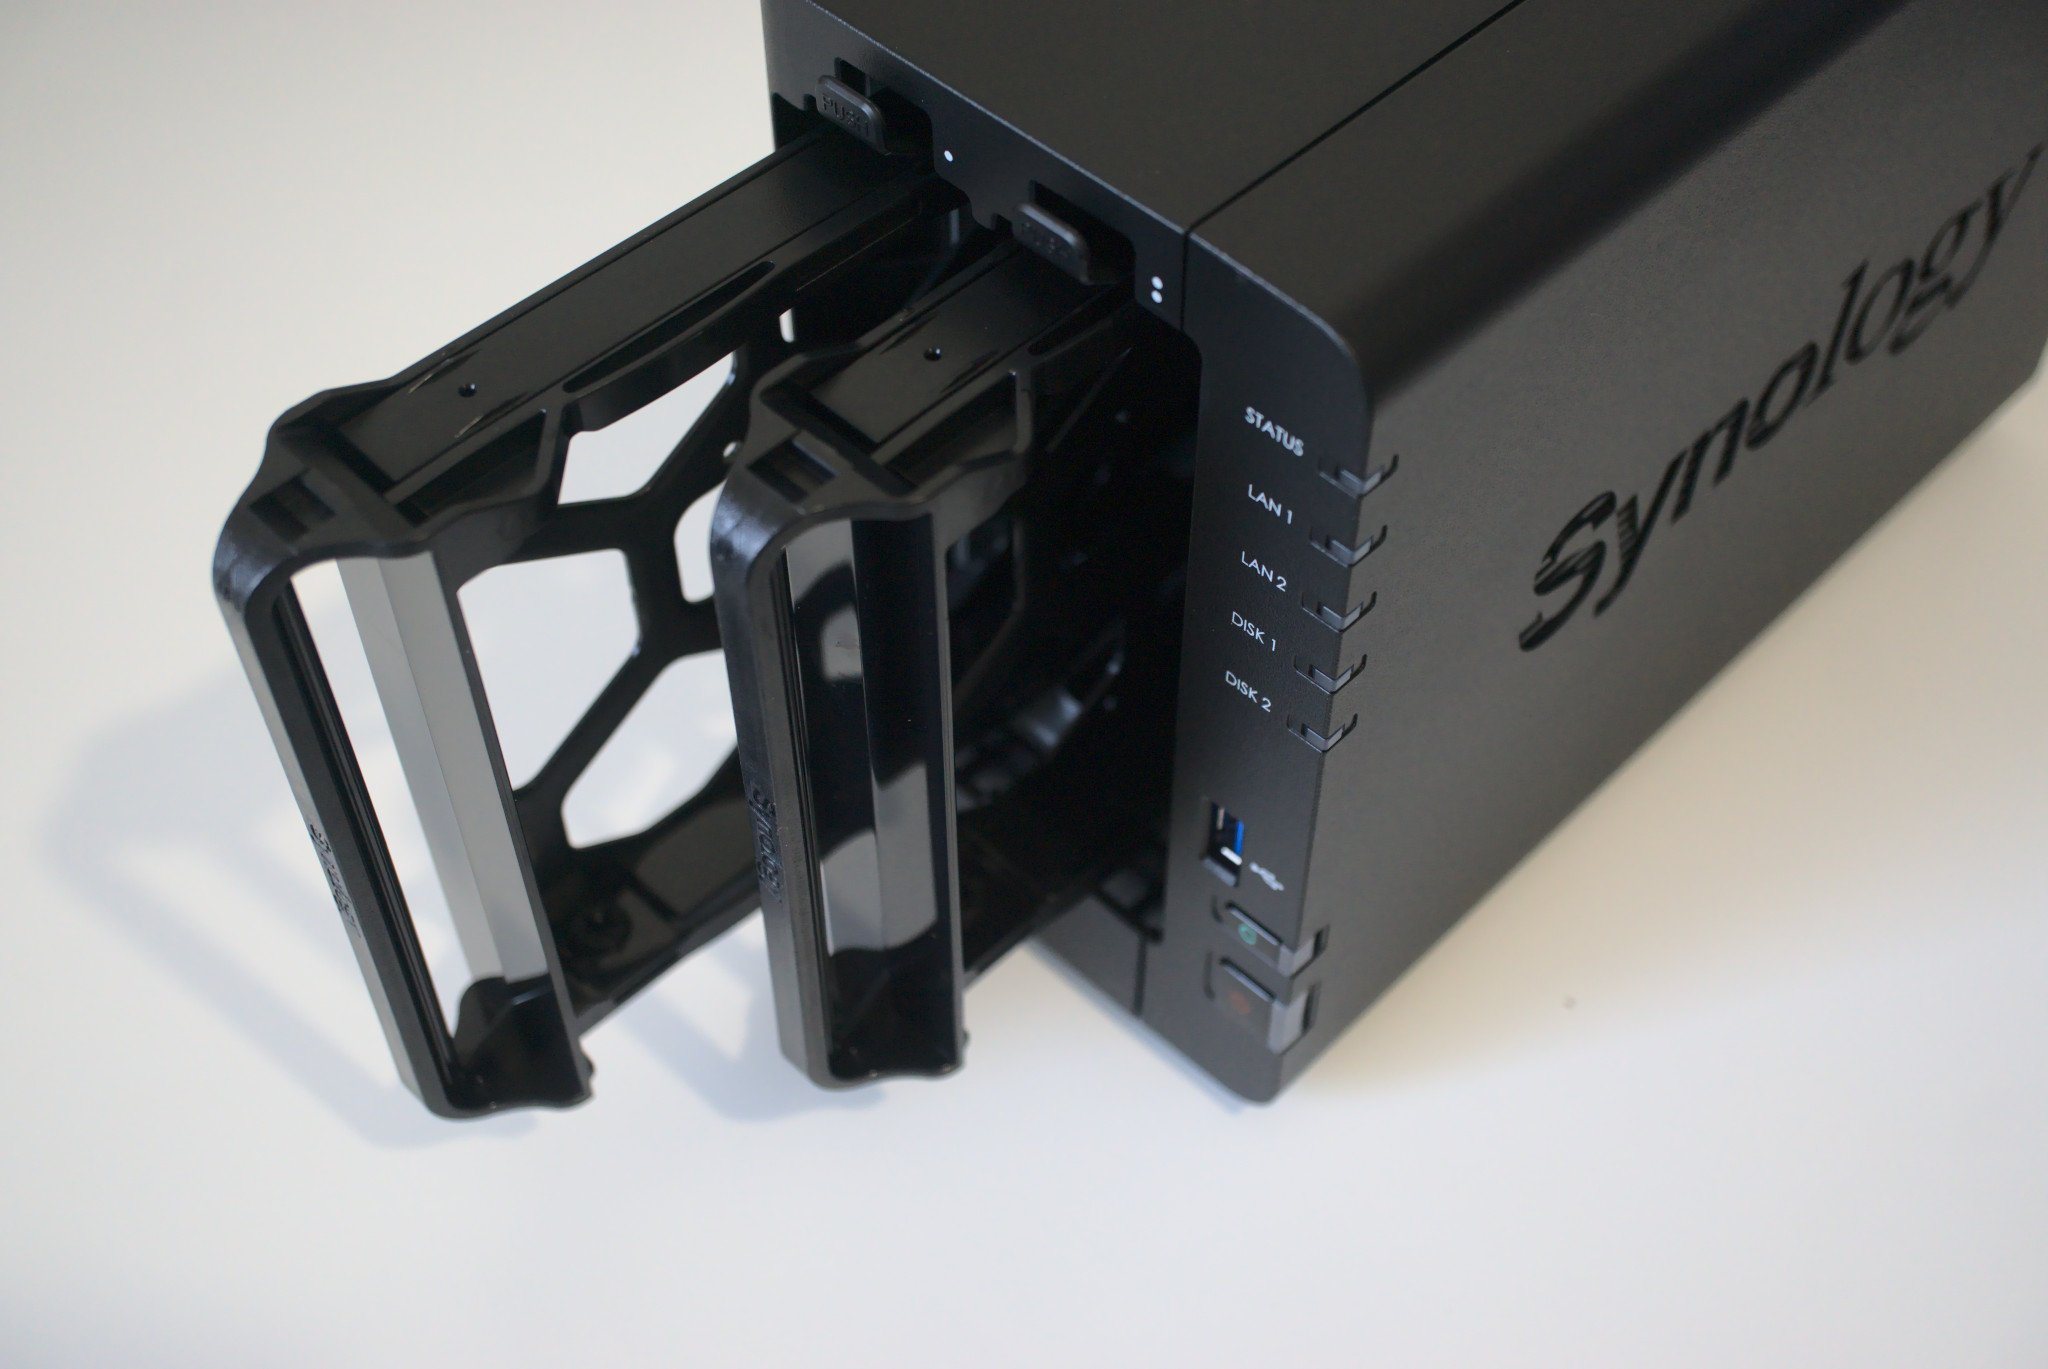 Synology DiskStation DS220+ review: The new best value NAS for 